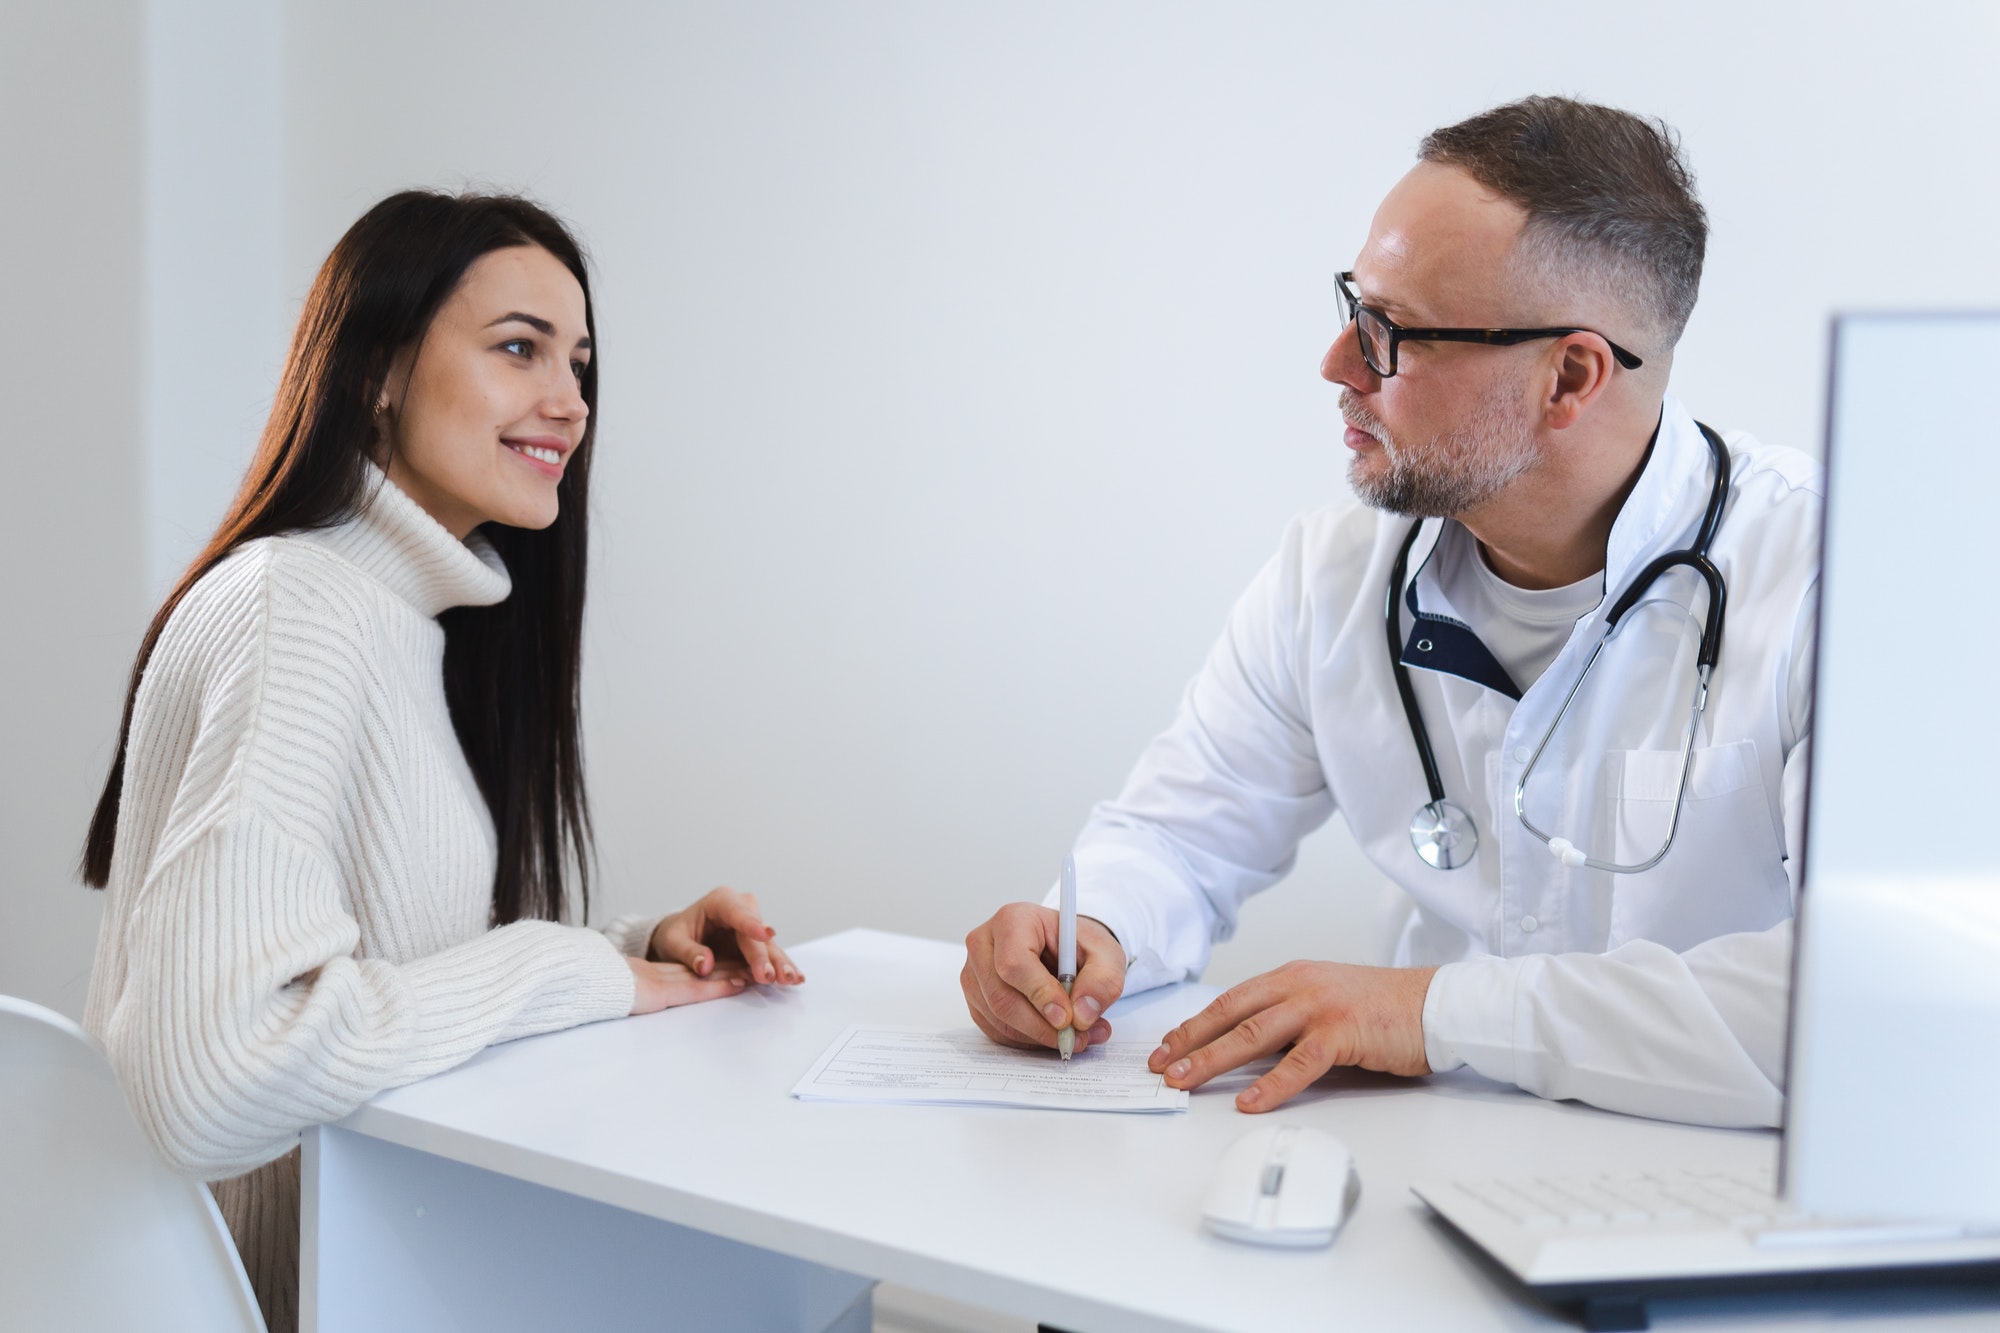 Male doctor writes a treatment plan for the female patient